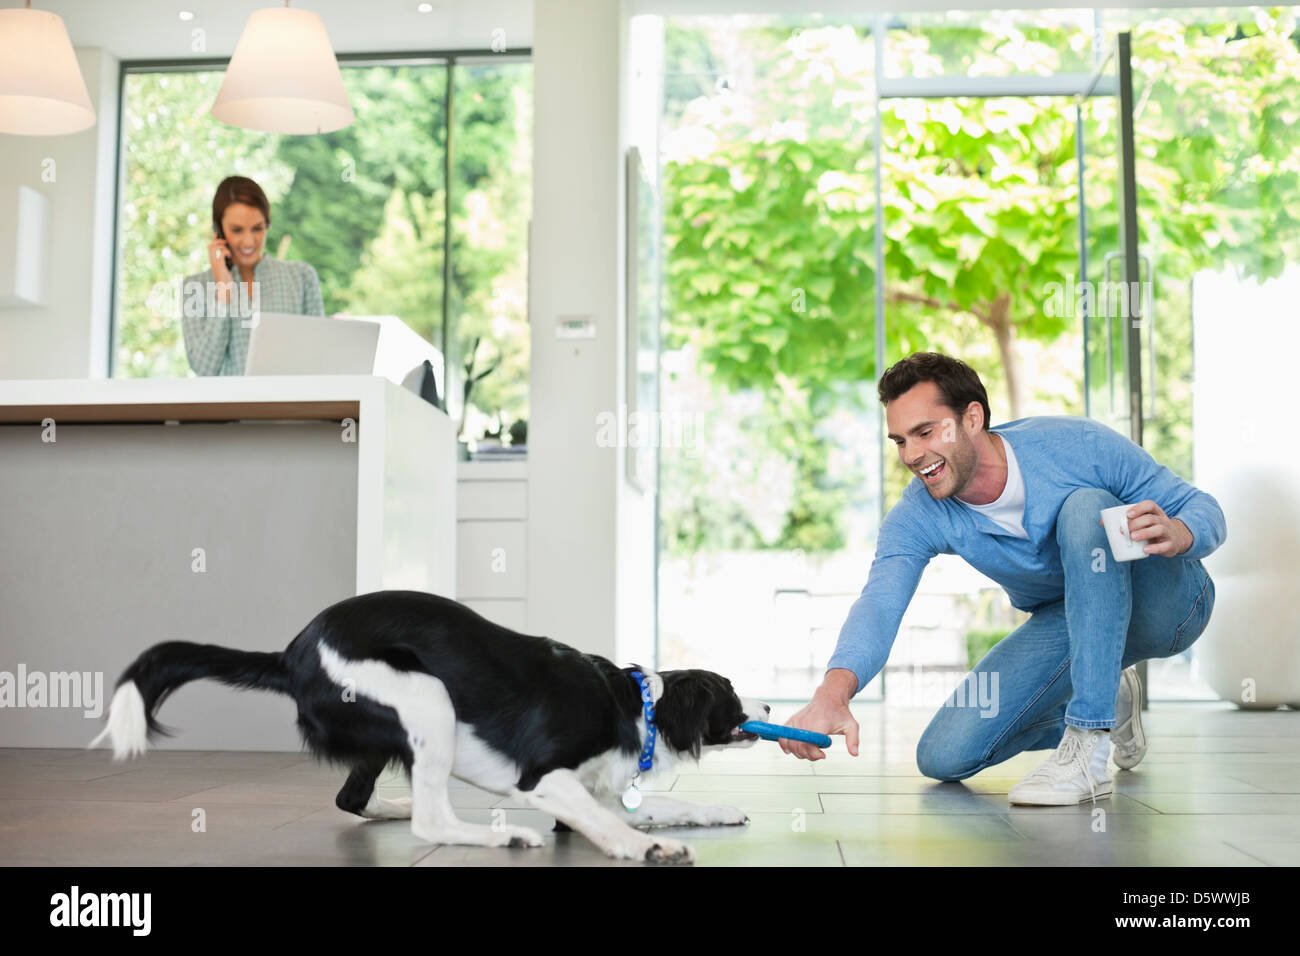 Man playing with dog in kitchen Stock Photo